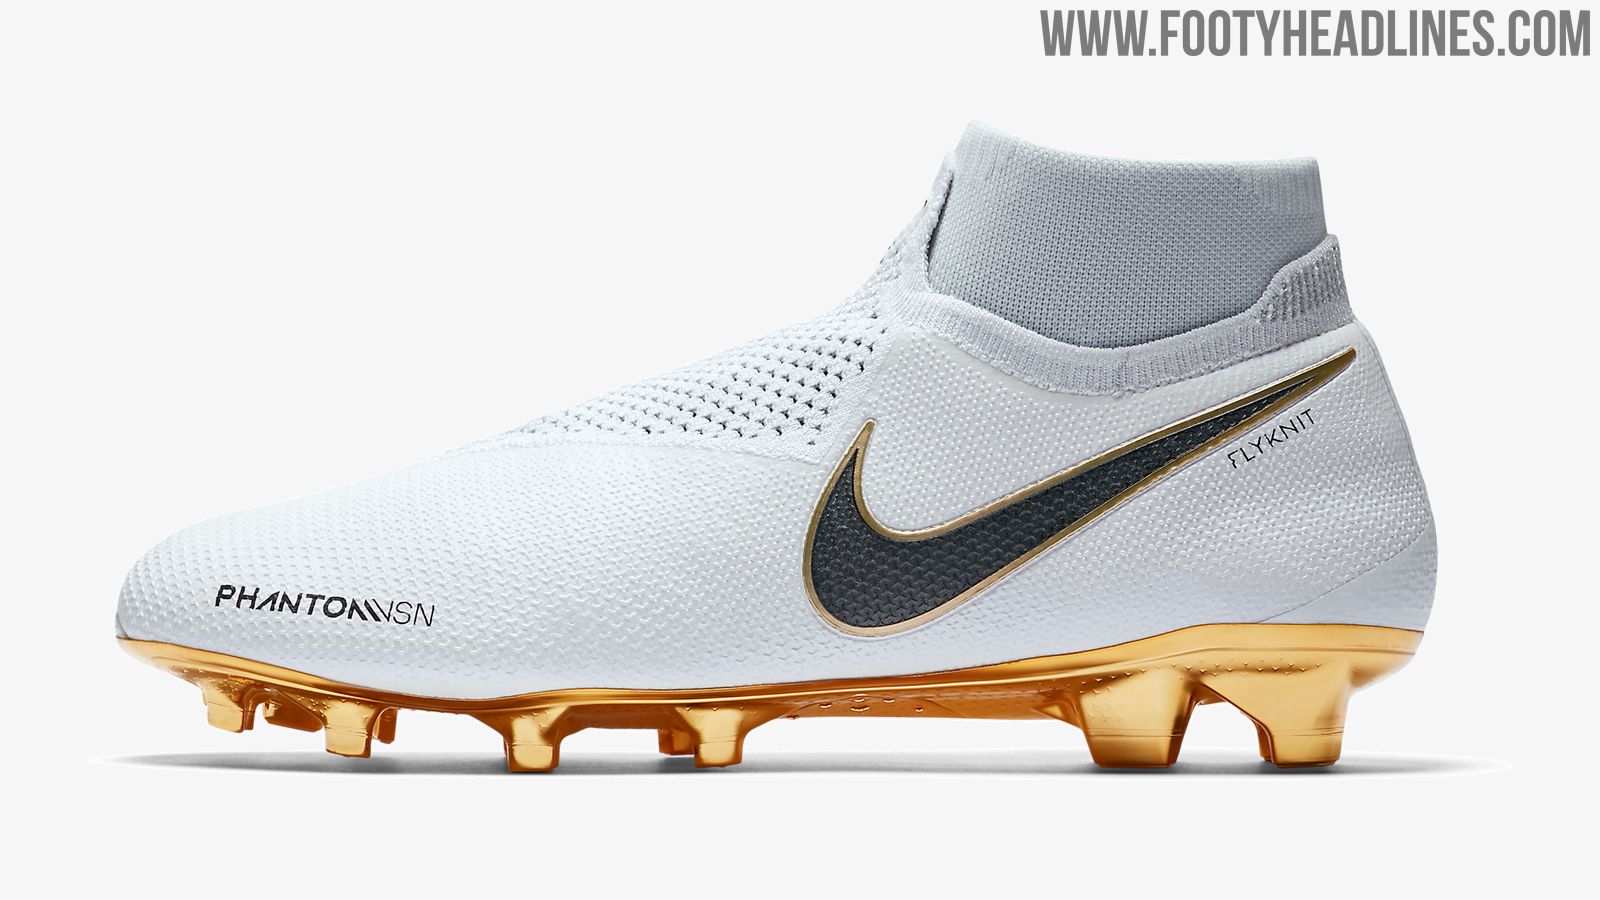 White / Gold Nike Phantom Vision Limited-Edition Boots Launched - Footy ...